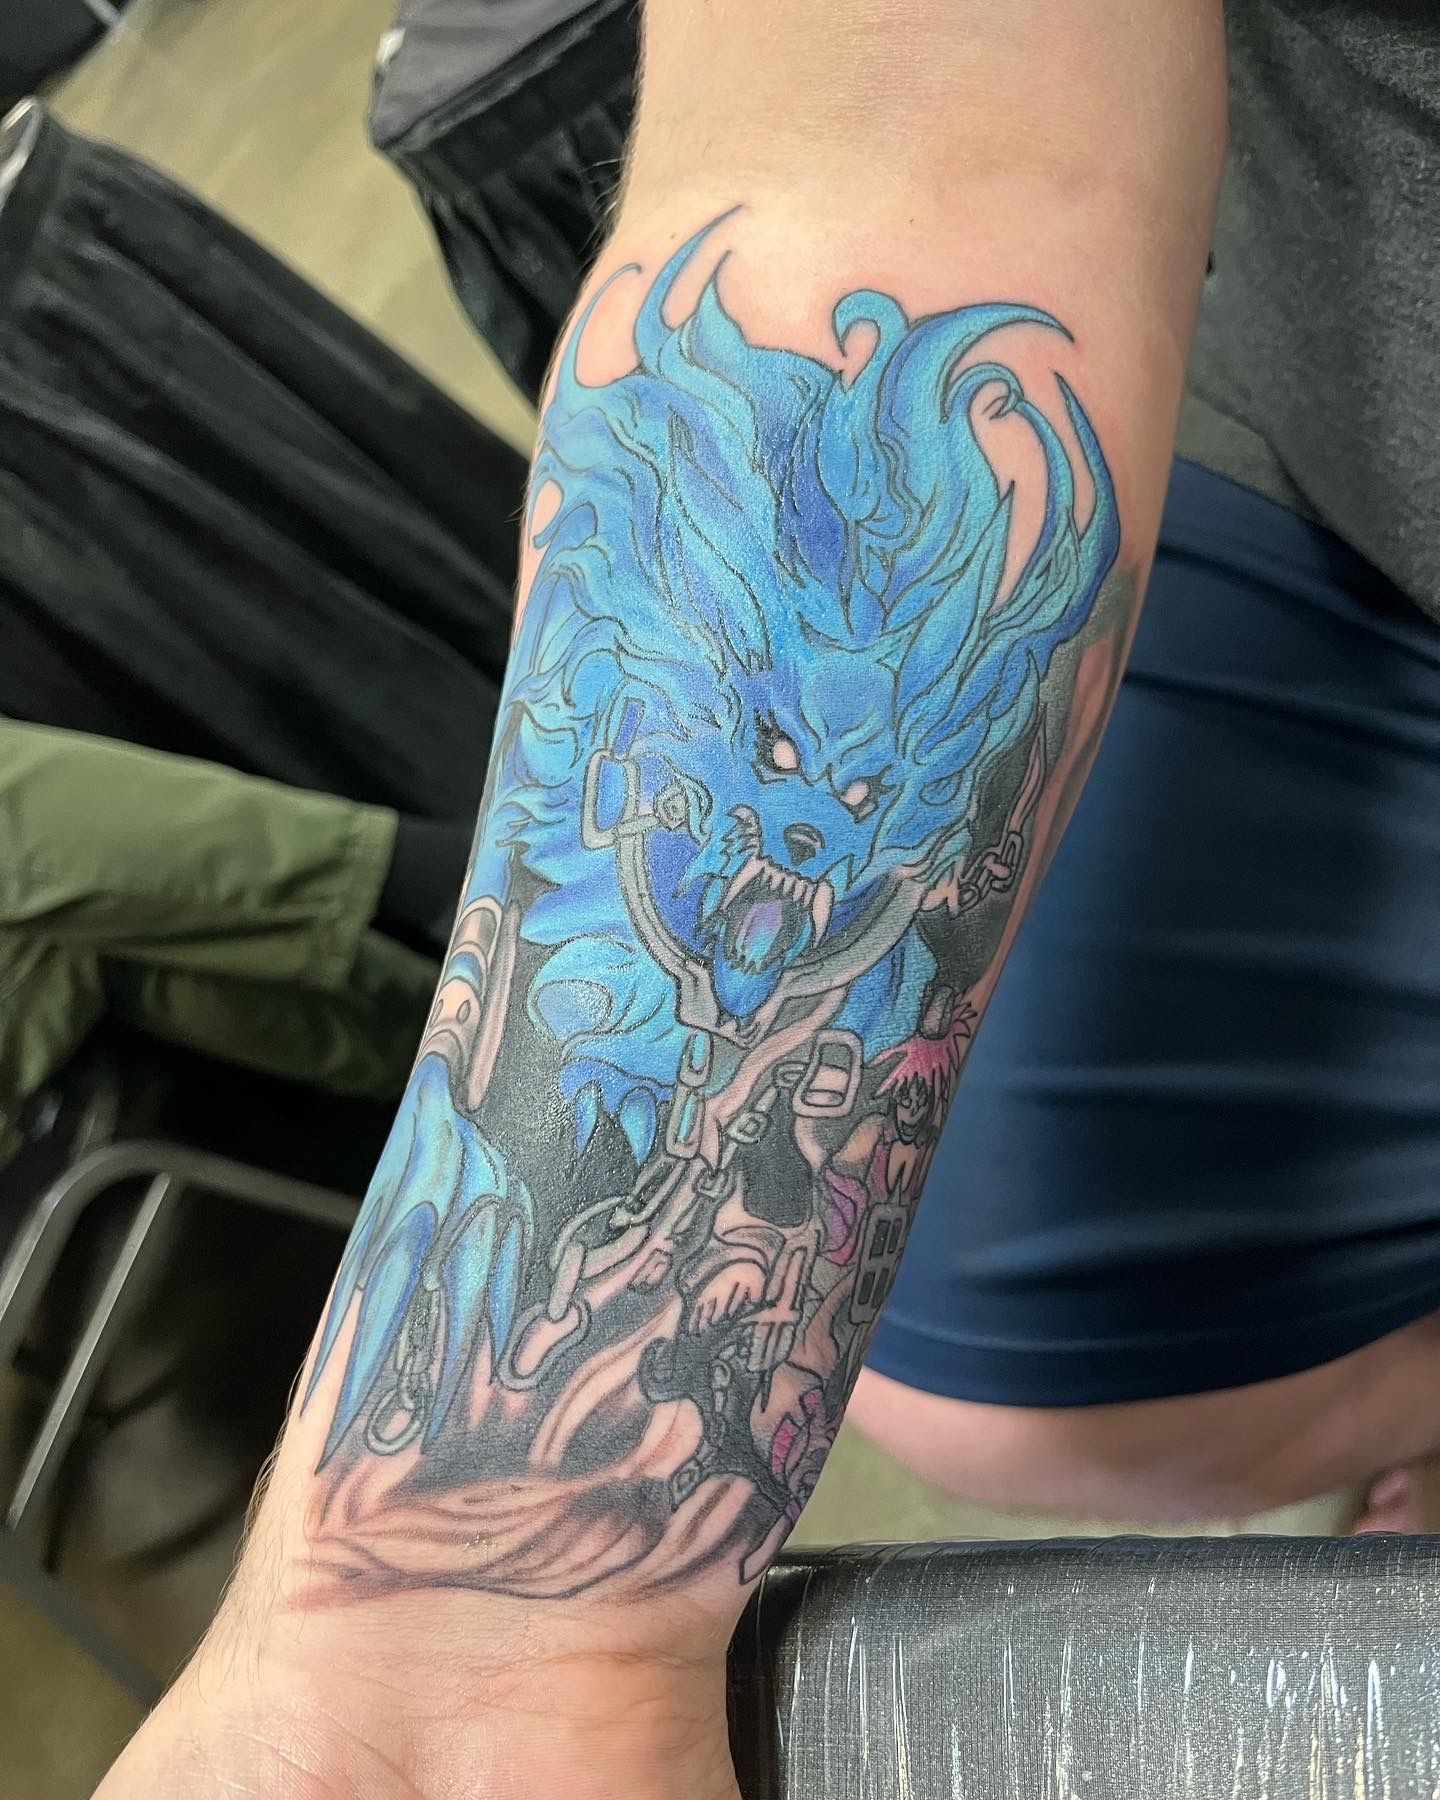 Still photo of the Yugioh tattoo by  DreamHouse Tattoo  Facebook